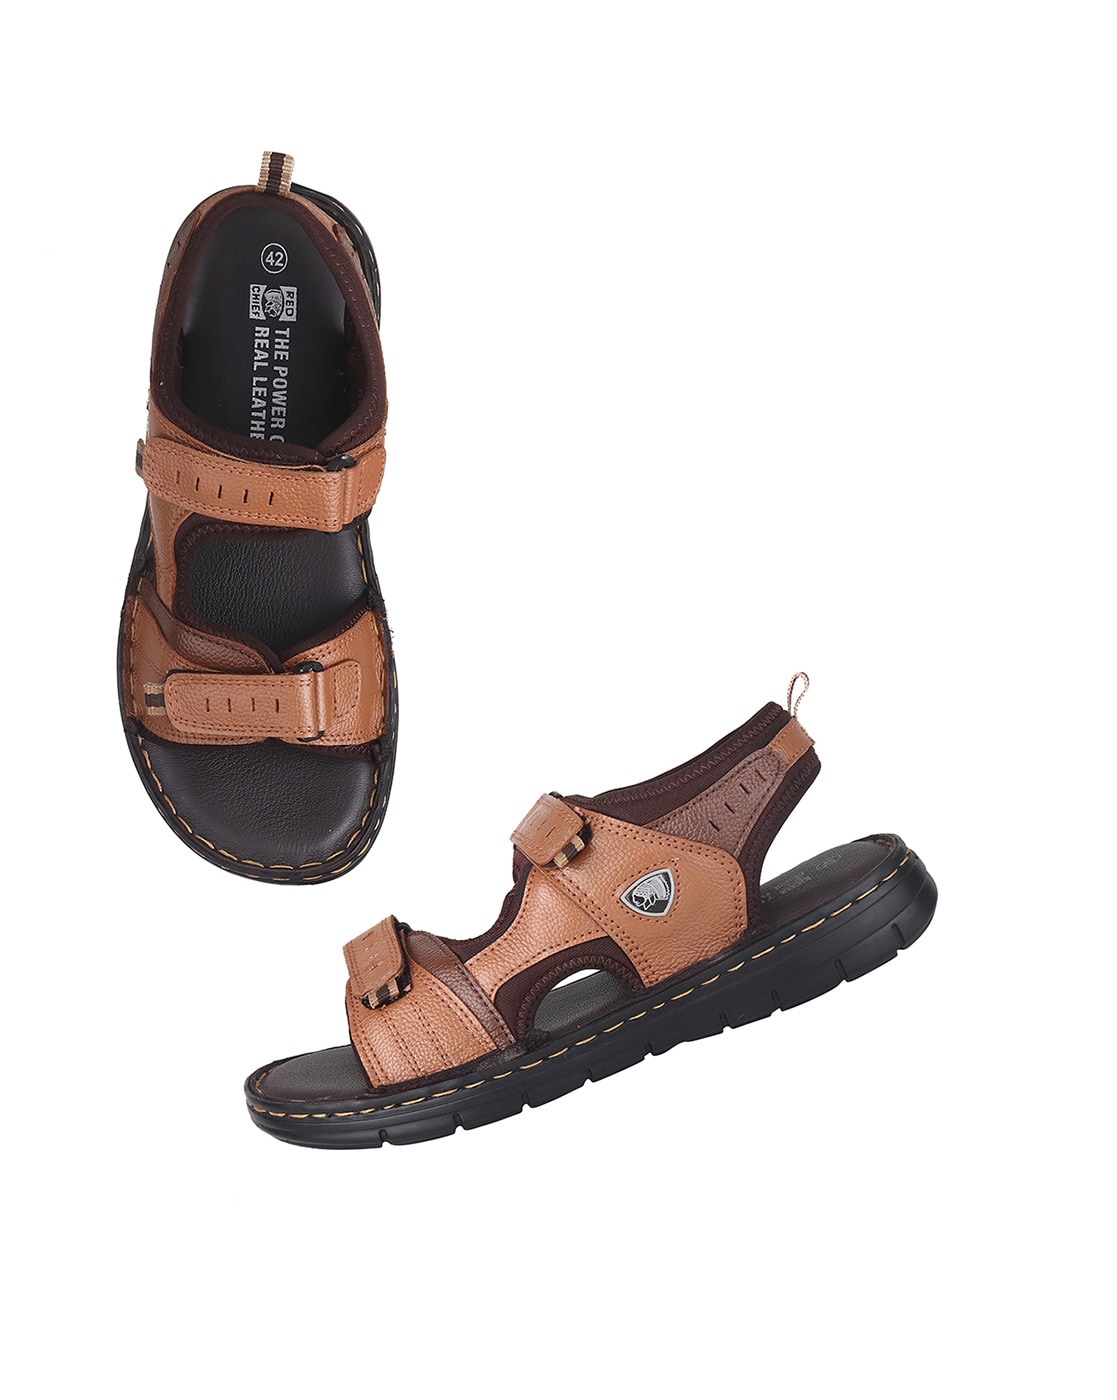 Latest Red Chief Sandals arrivals - Men - 9 products | FASHIOLA INDIA